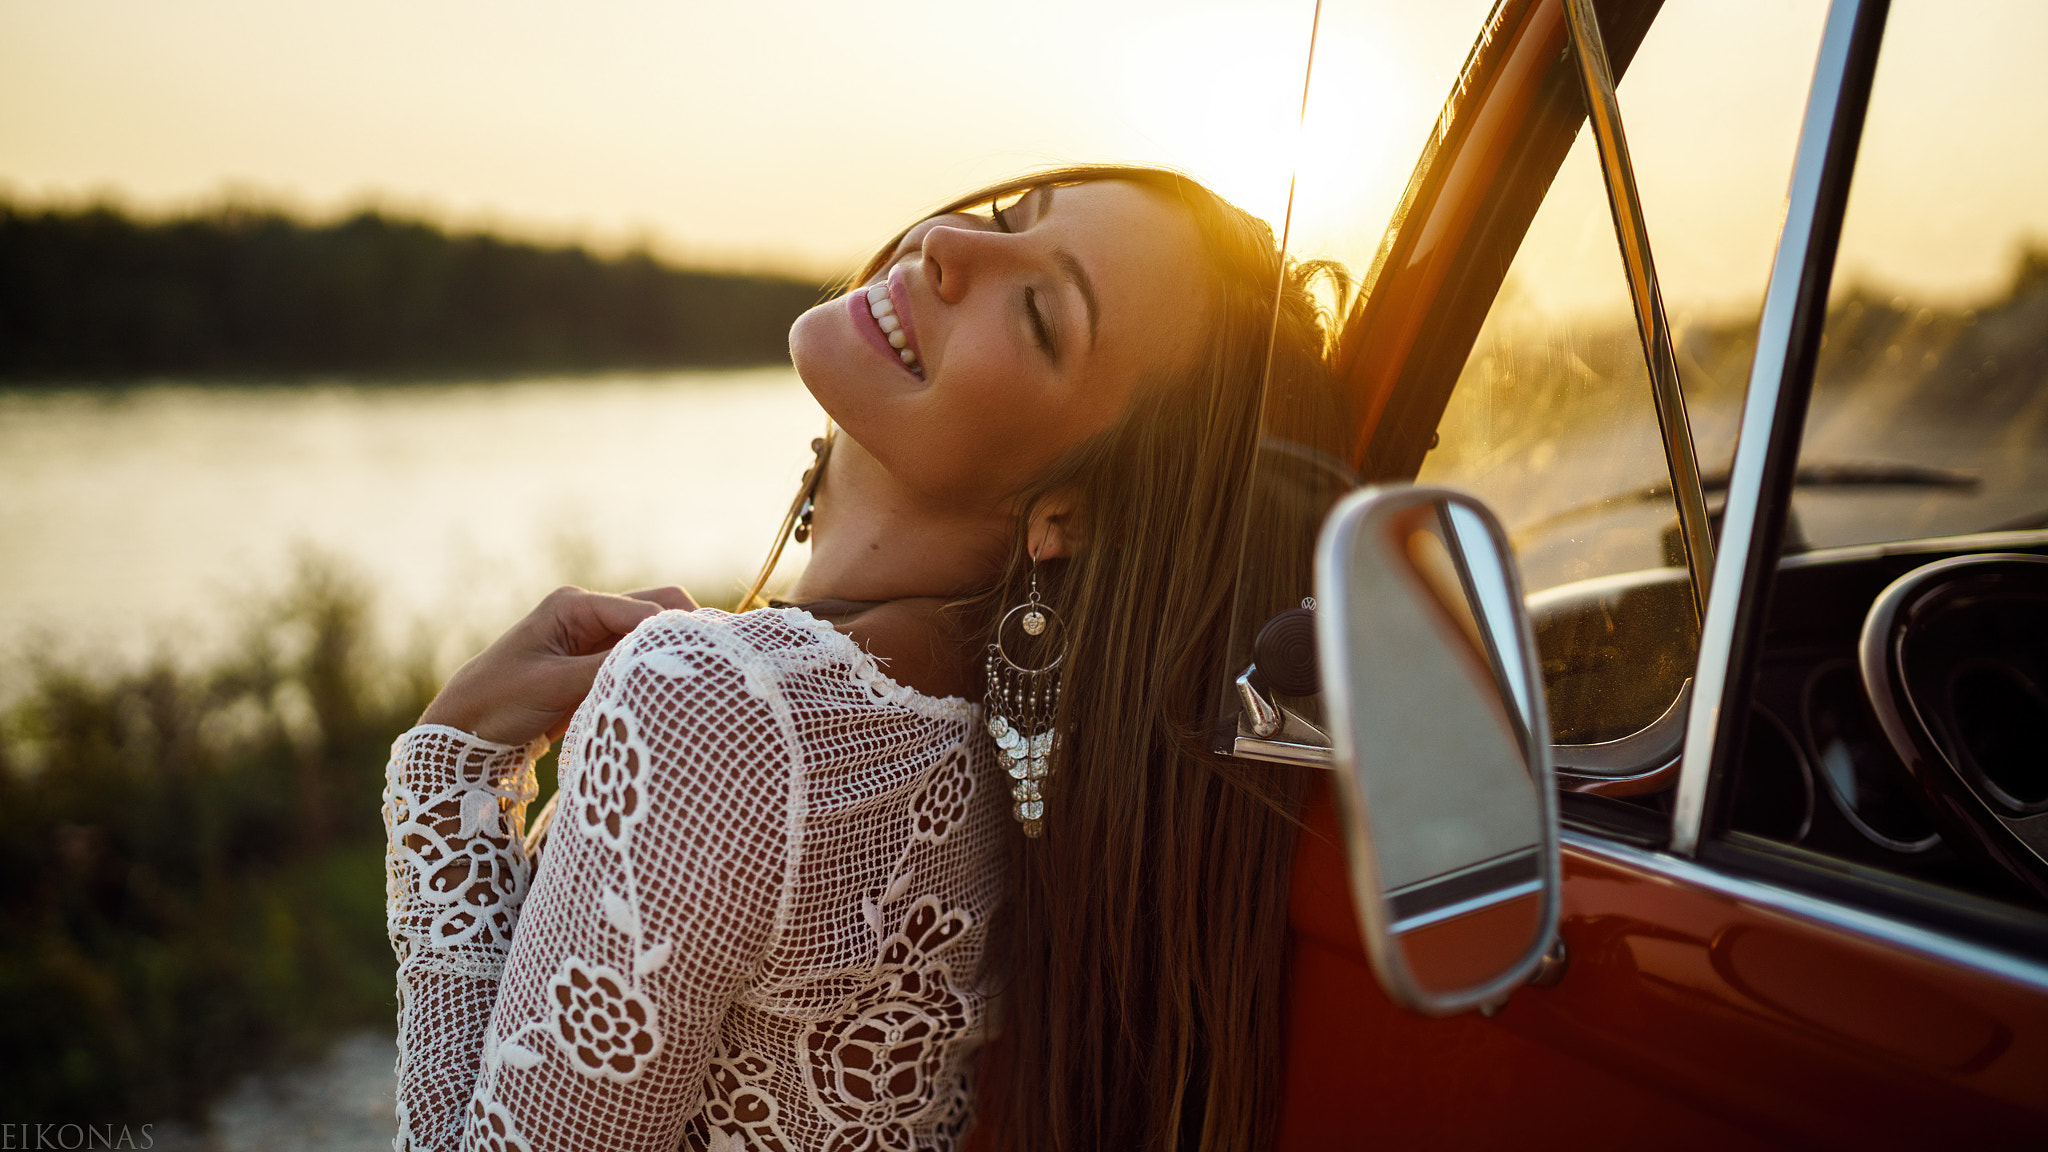 People 2048x1152 Eikonas women model smiling car 500px women with cars closed eyes women outdoors Evelyn Oberleitner